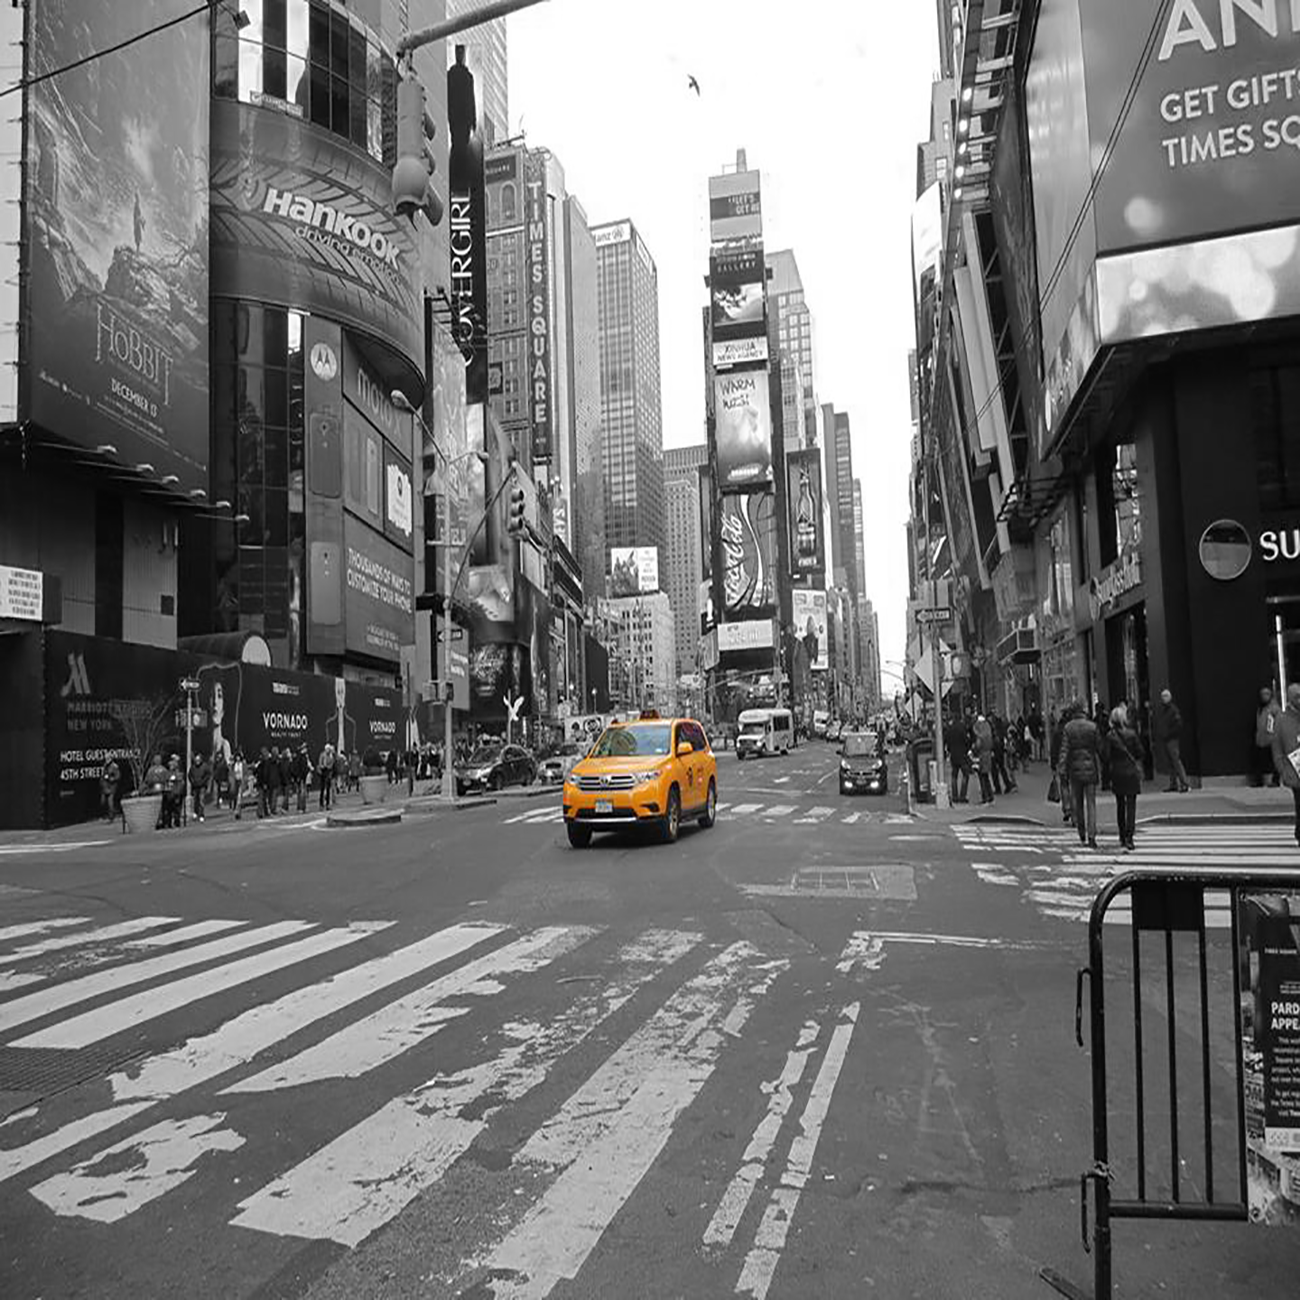 NYC Cab Times Square, New York City